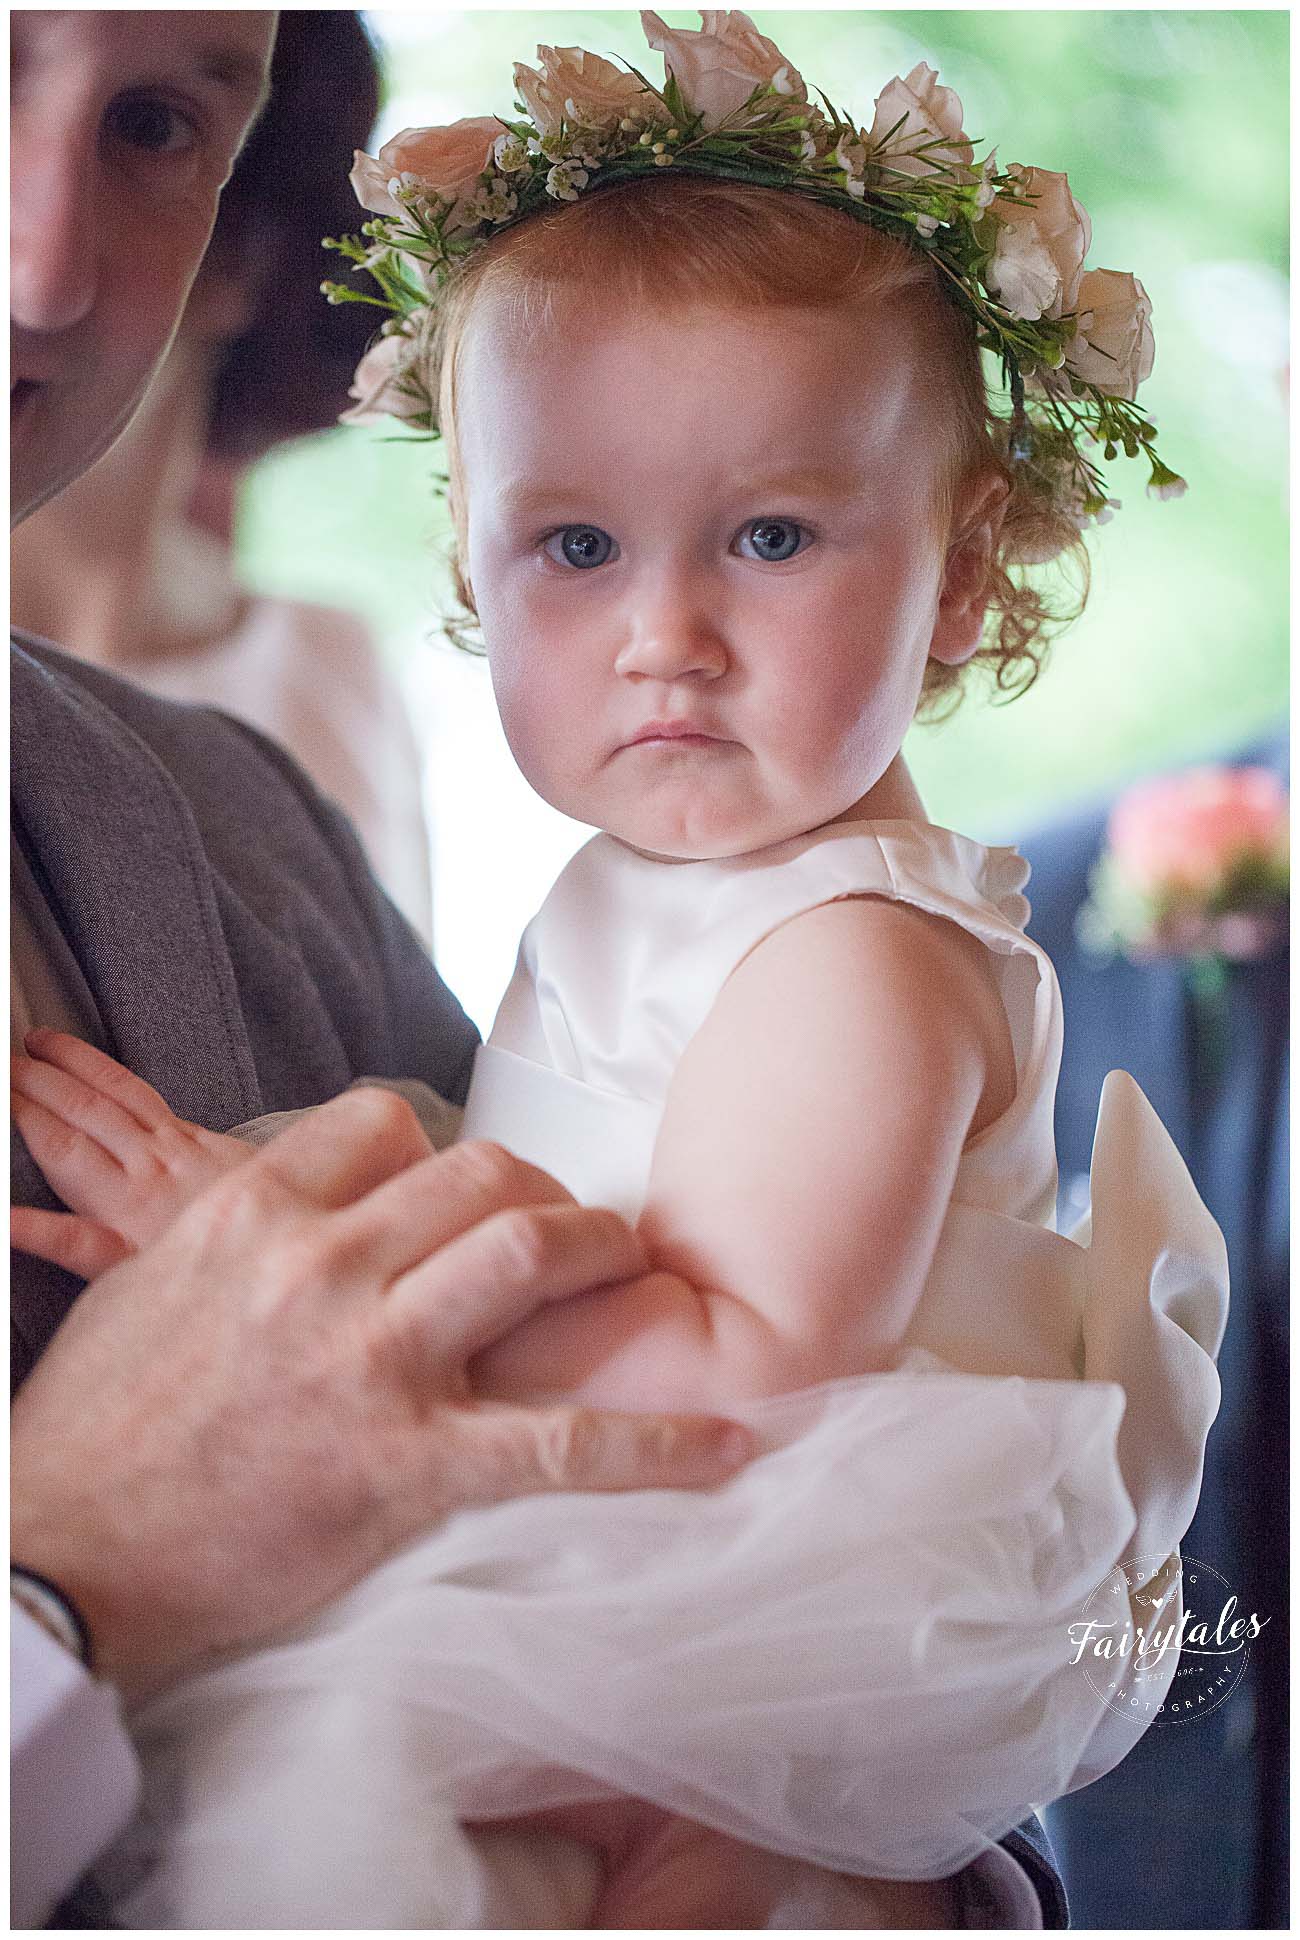 Flower girl at the cruin looking grumpy